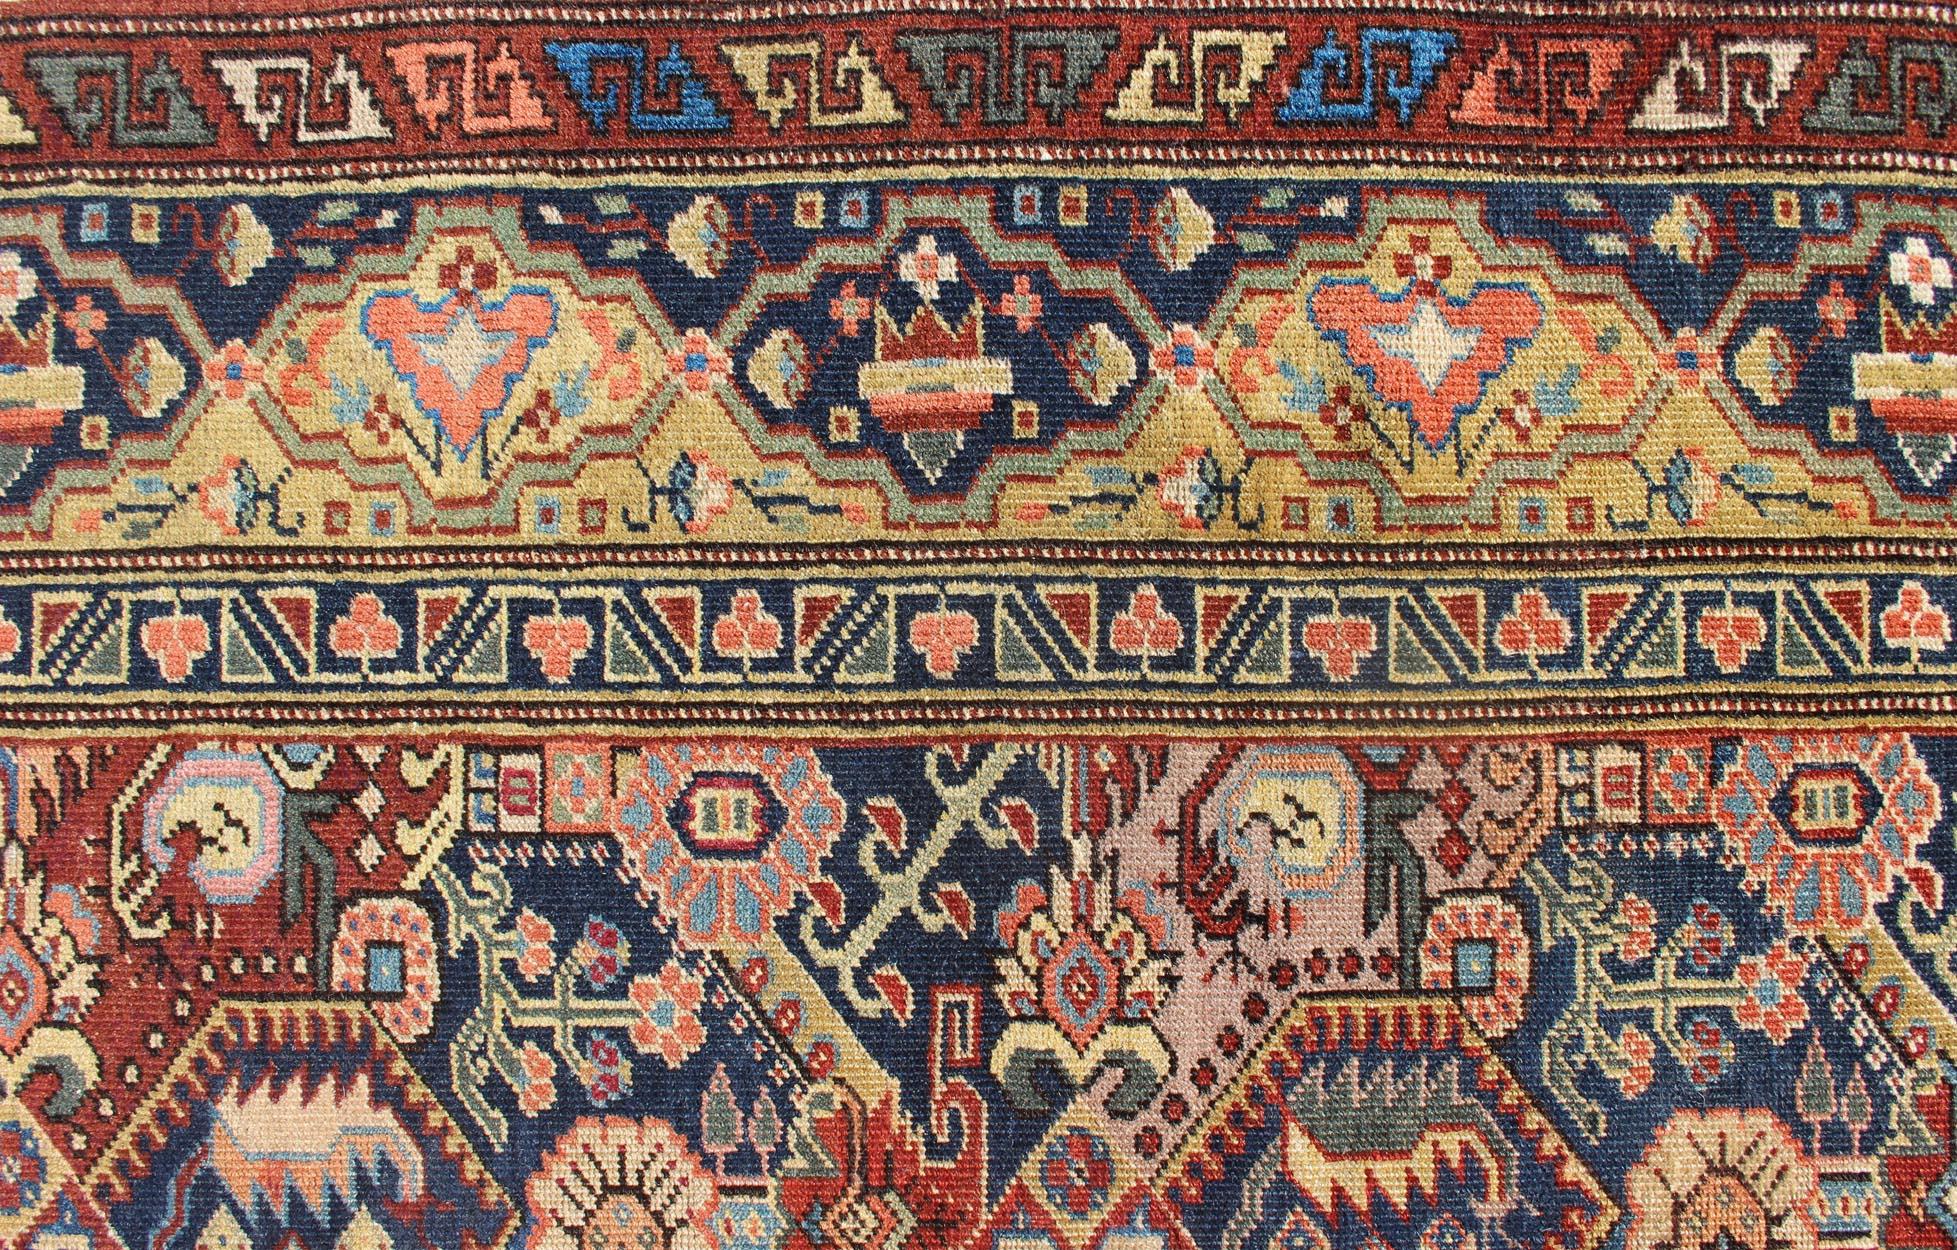 19th Century Exquisite Antique Caucasian Seychour Rug In Red's And Blue's In Good Condition For Sale In Atlanta, GA